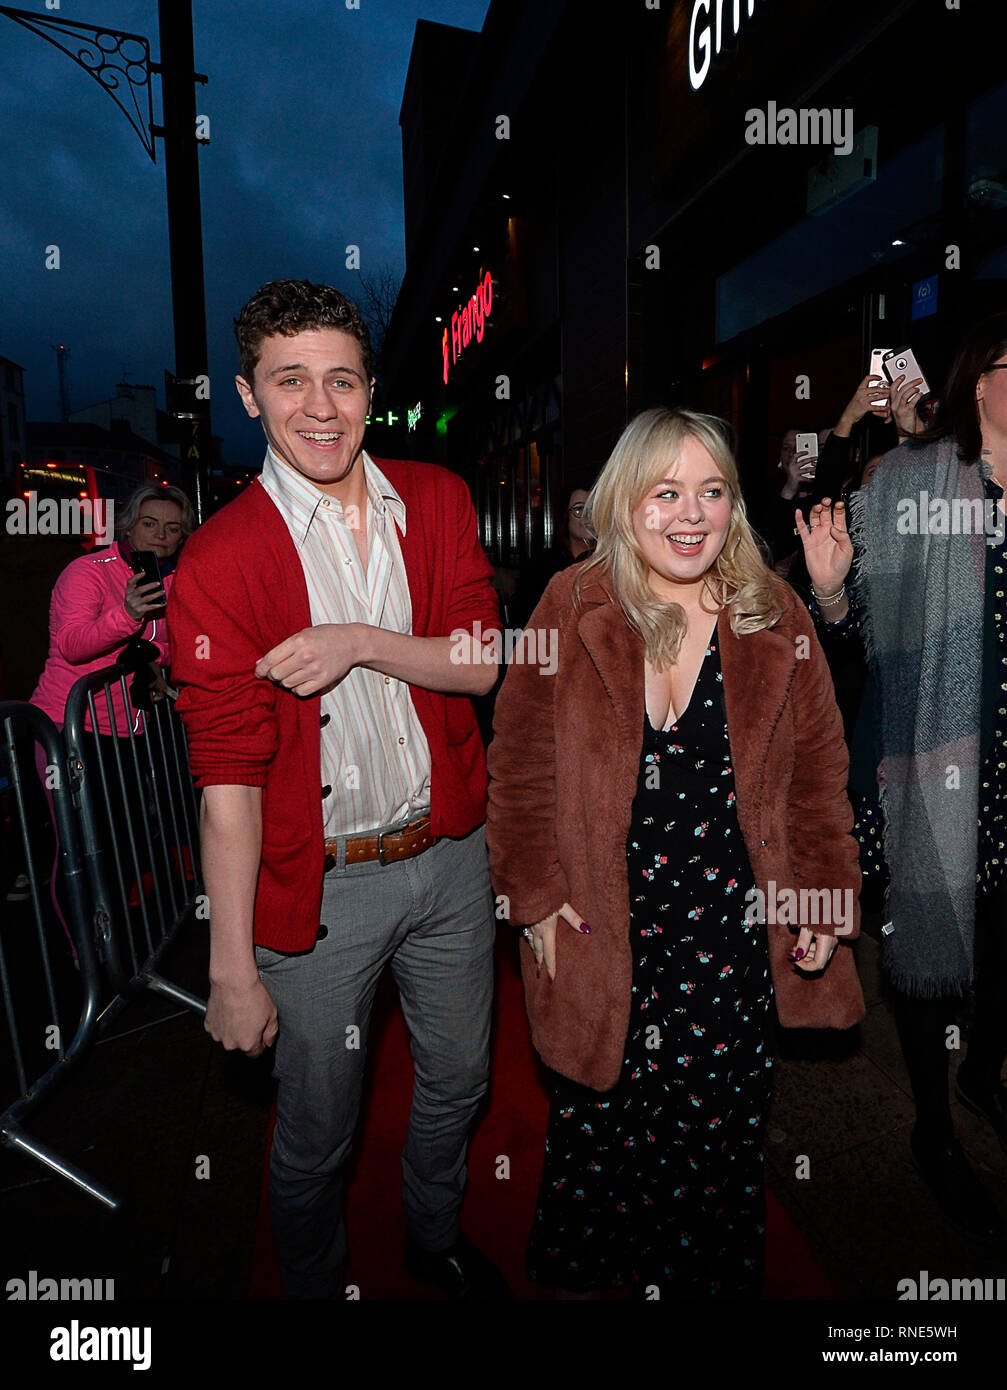 Londonderry, UK. 18th Feb, 2019. Derry Girls Series 2 Premiere, Londonderry, Northern Ireland: 18th February 2019. Actors Dylan Llewellyn and Nicola Coughlan arrive at the Omniplex Cinema, Londonderry for the premiere of Derry Girls Series 2.  ©George Sweeney / Alamy Live News Credit: George Sweeney/Alamy Live News Stock Photo